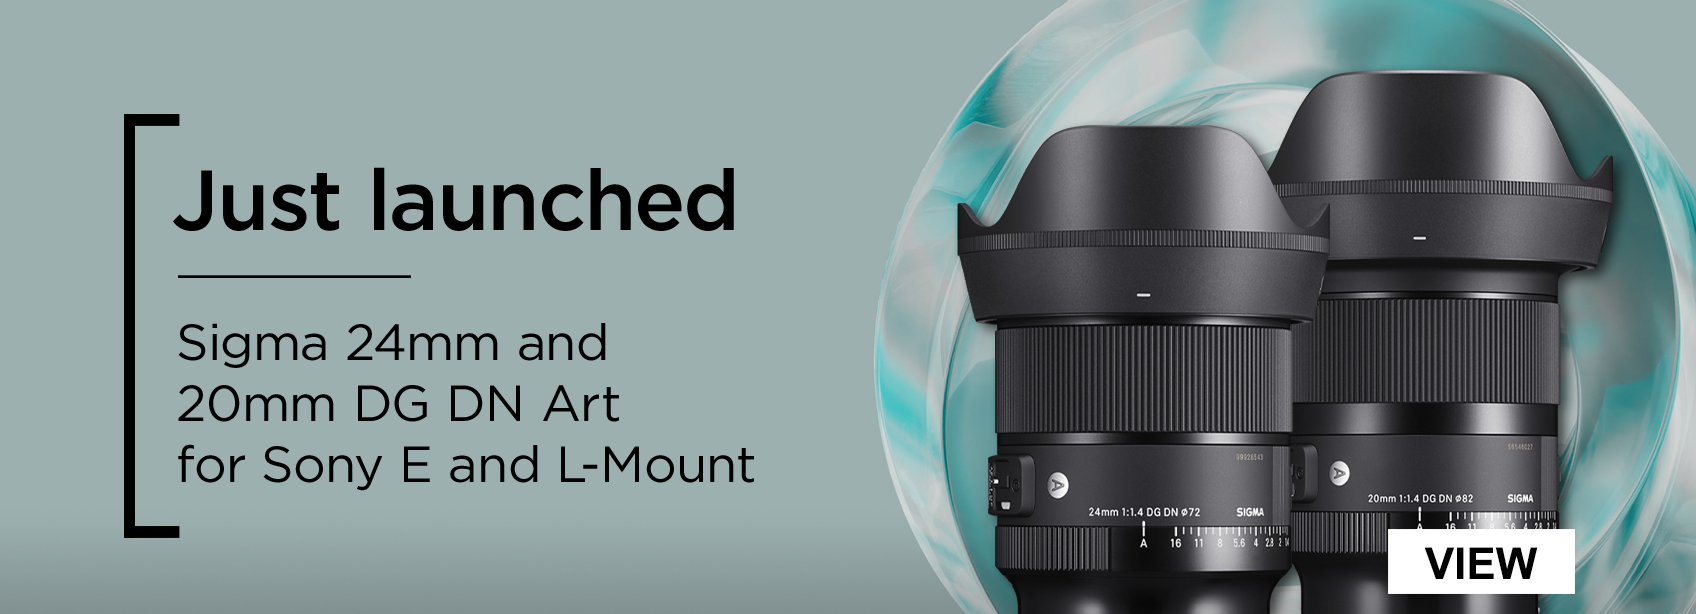 Just launched - Sigma 24mm and 20mm DG DN Art for Sony E and L-Mount